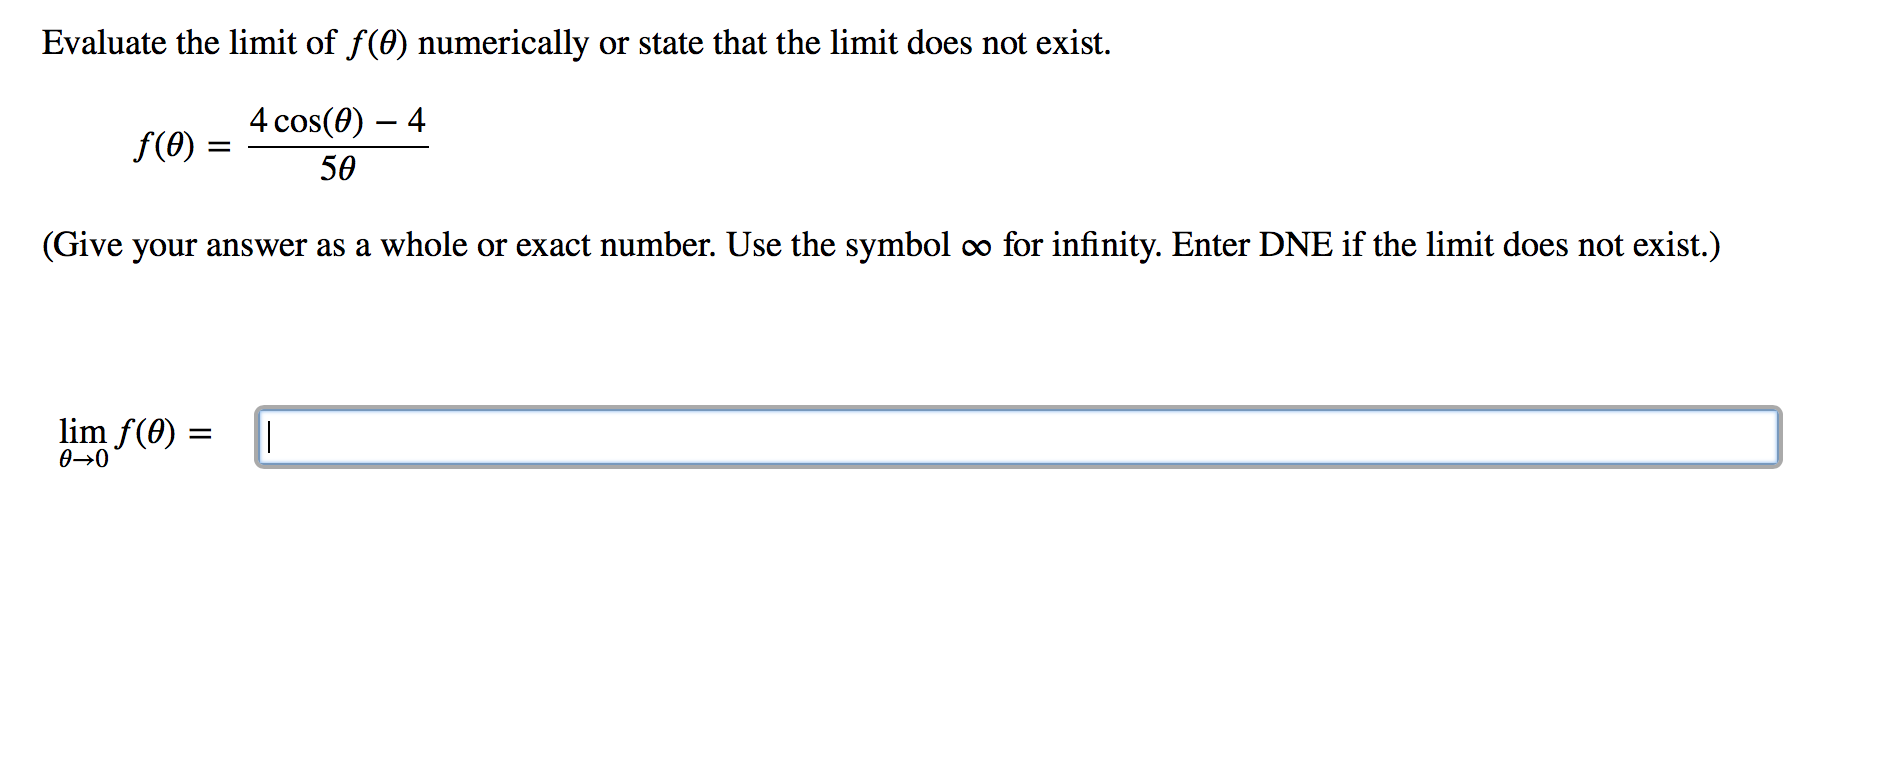 Evaluate the limit of f(0) numerically or state that the limit does not exist.
4 cos(0) – 4
f(0) =
50
(Give your answer as a whole or exact number. Use the symbol ∞ for infinity. Enter DNE if the limit does not exist.)
lim f(0) =
